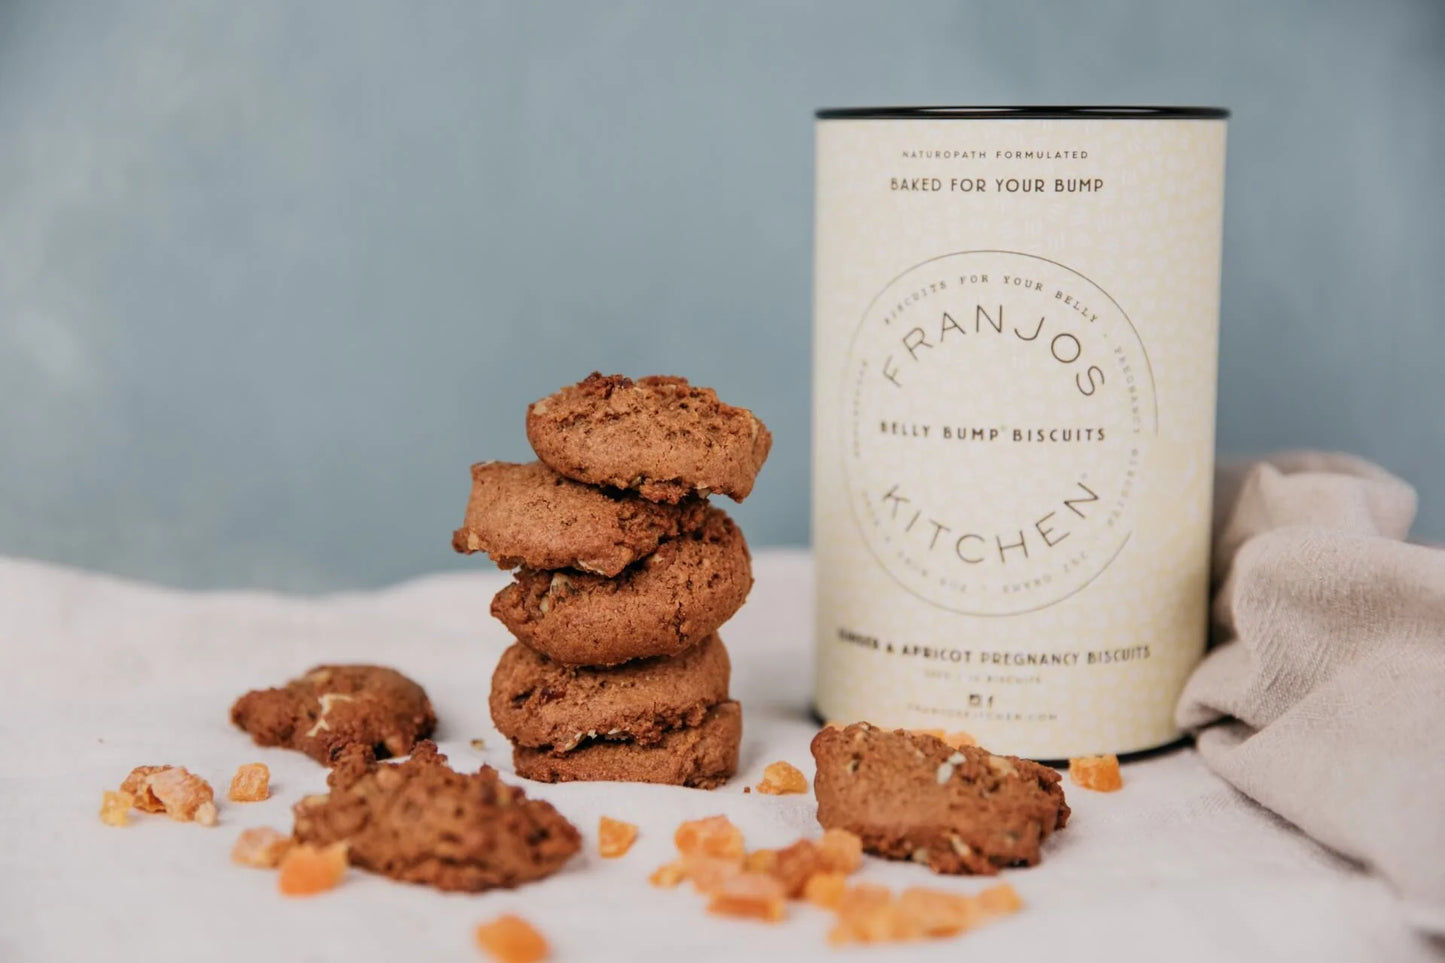 Franjos Belly Bump Pregnancy Biscuits – Ginger and Apricot